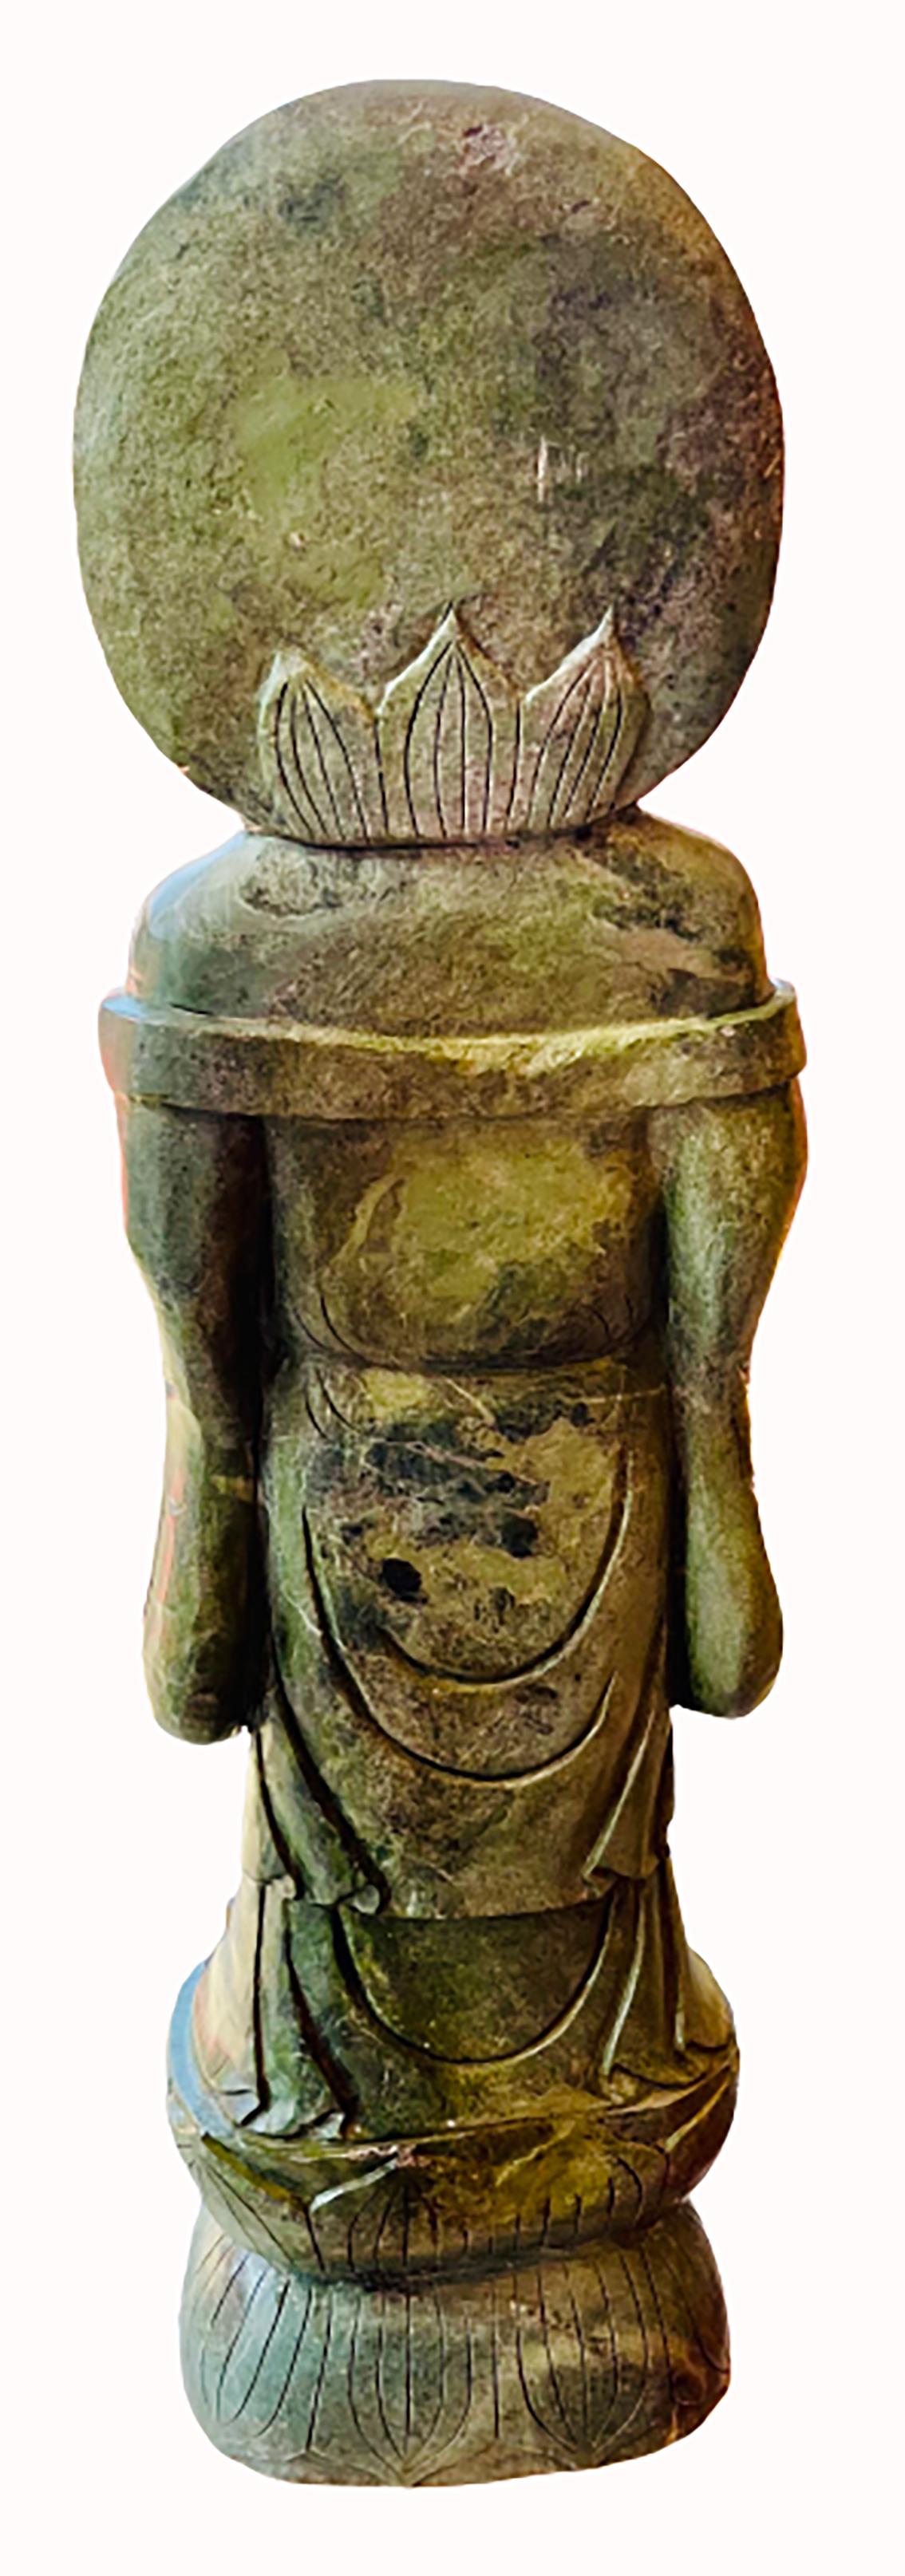 Chinese Large Laughing Buddha Statue - Green Hard Stone - China - Period: Art Nouveau For Sale